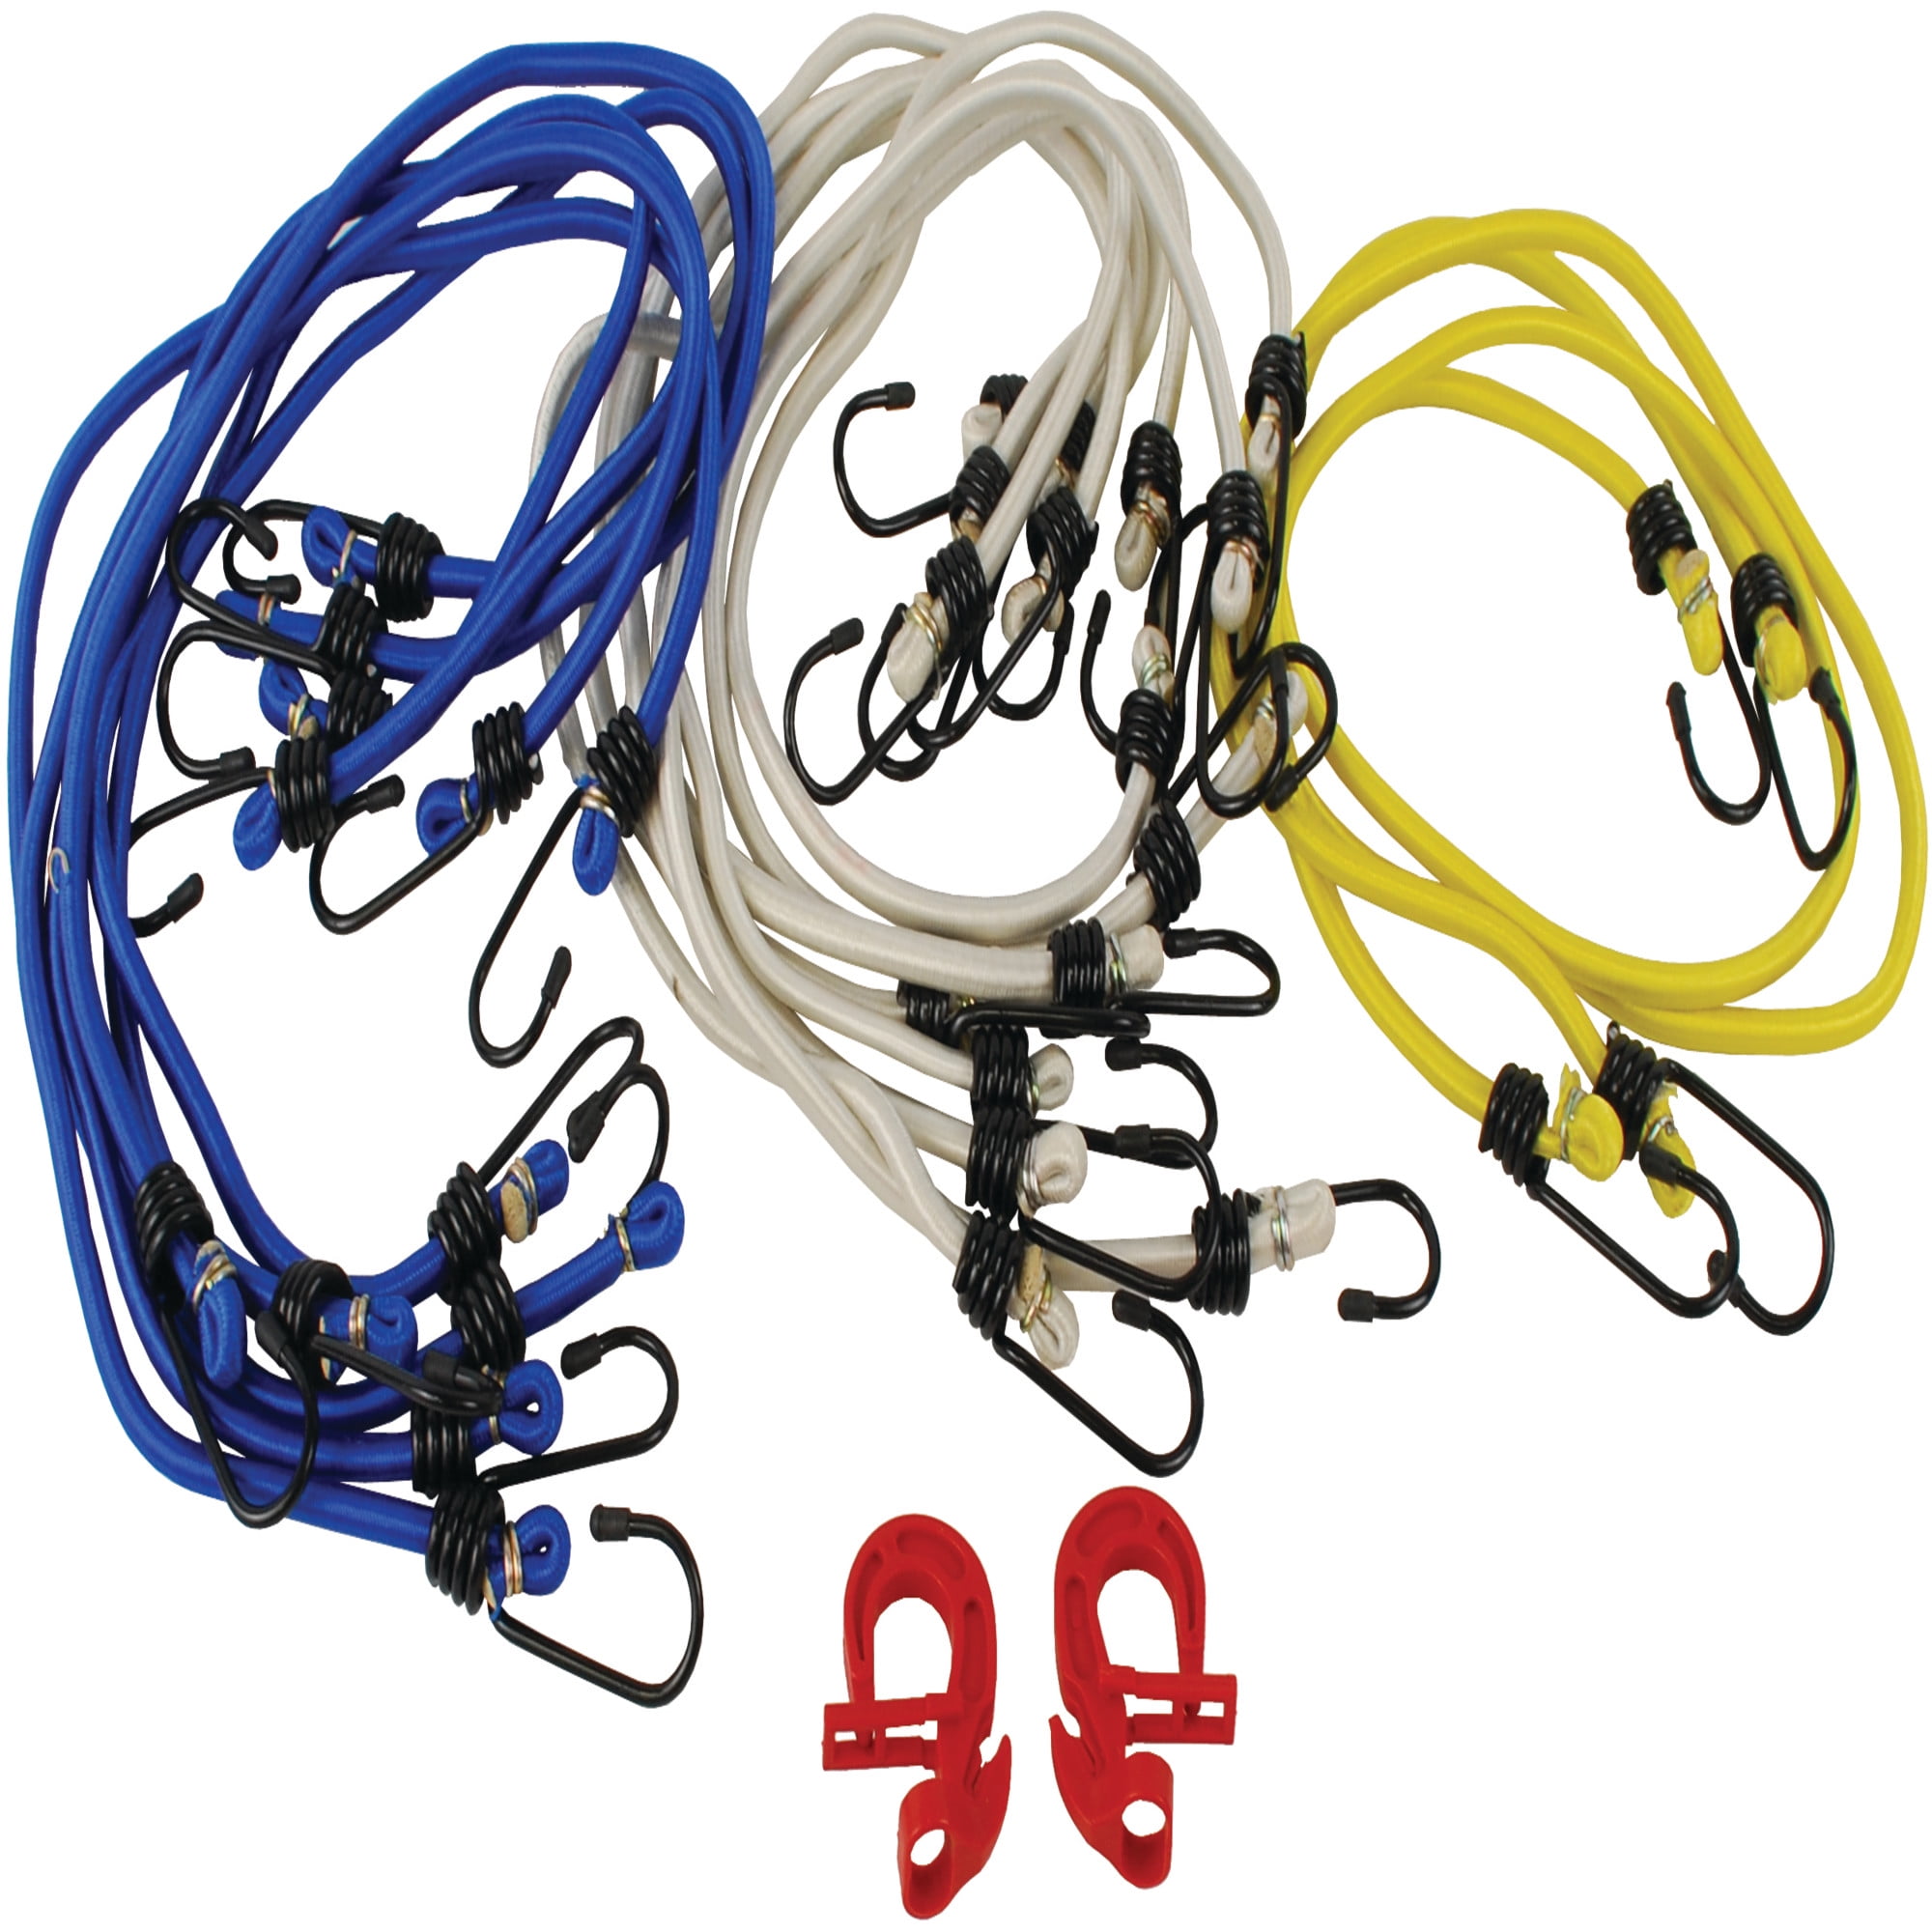 1.5 FT. 20PK 18" Long Bungee Cord Elastic Tie Down Strap FREE SHIPPING 